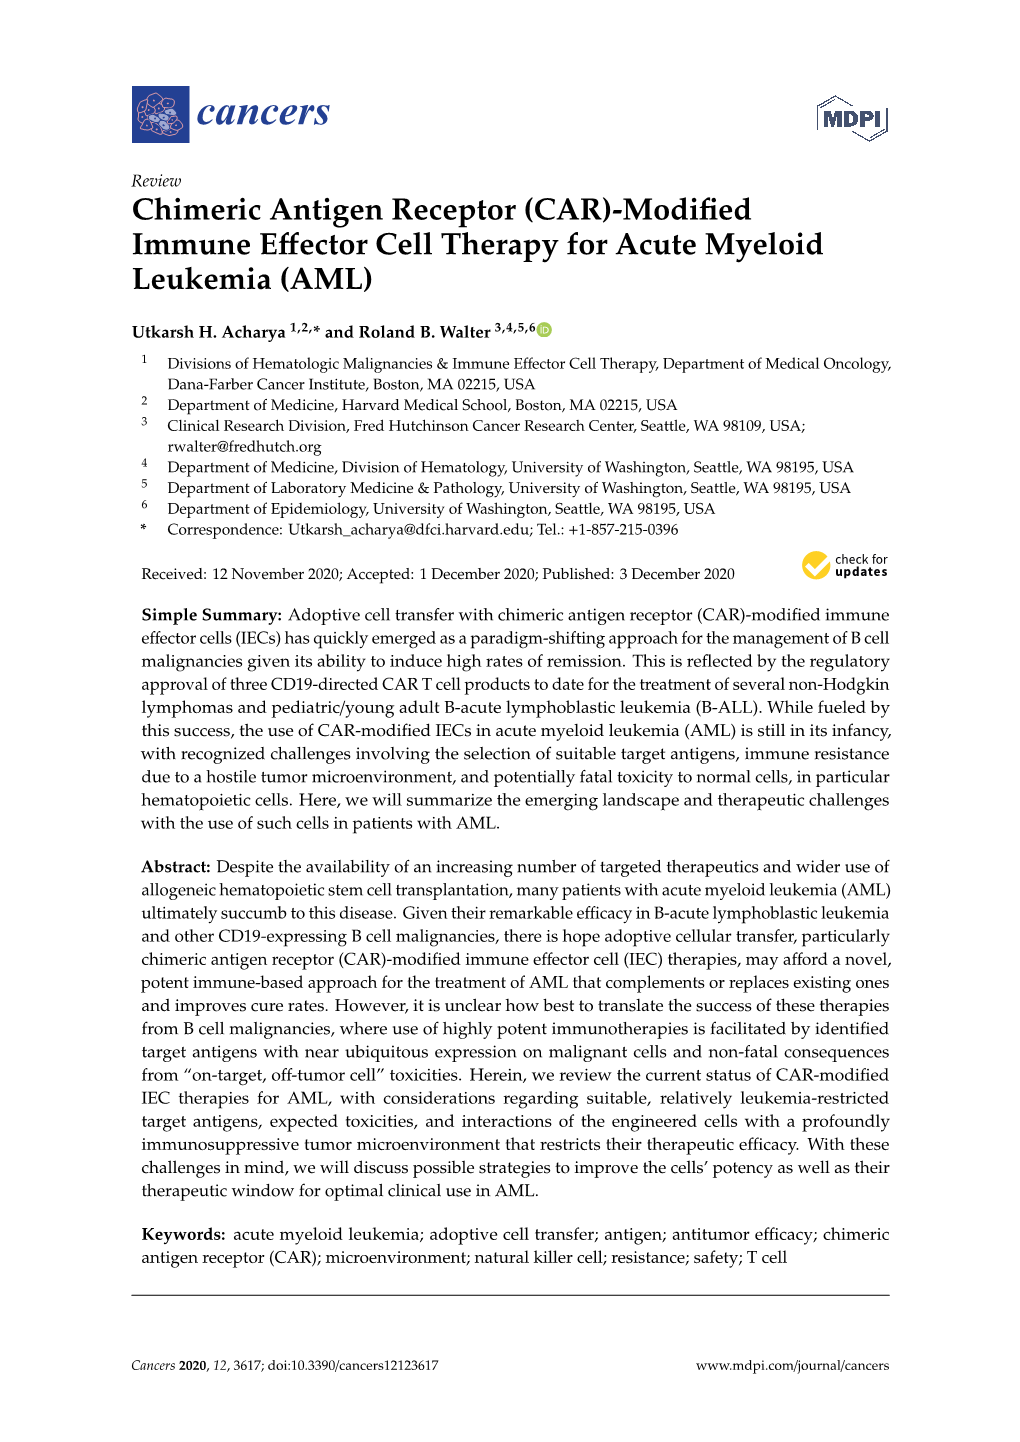 (CAR)-Modified Immune Effector Cell Therapy for Acute Myeloid Leukemia